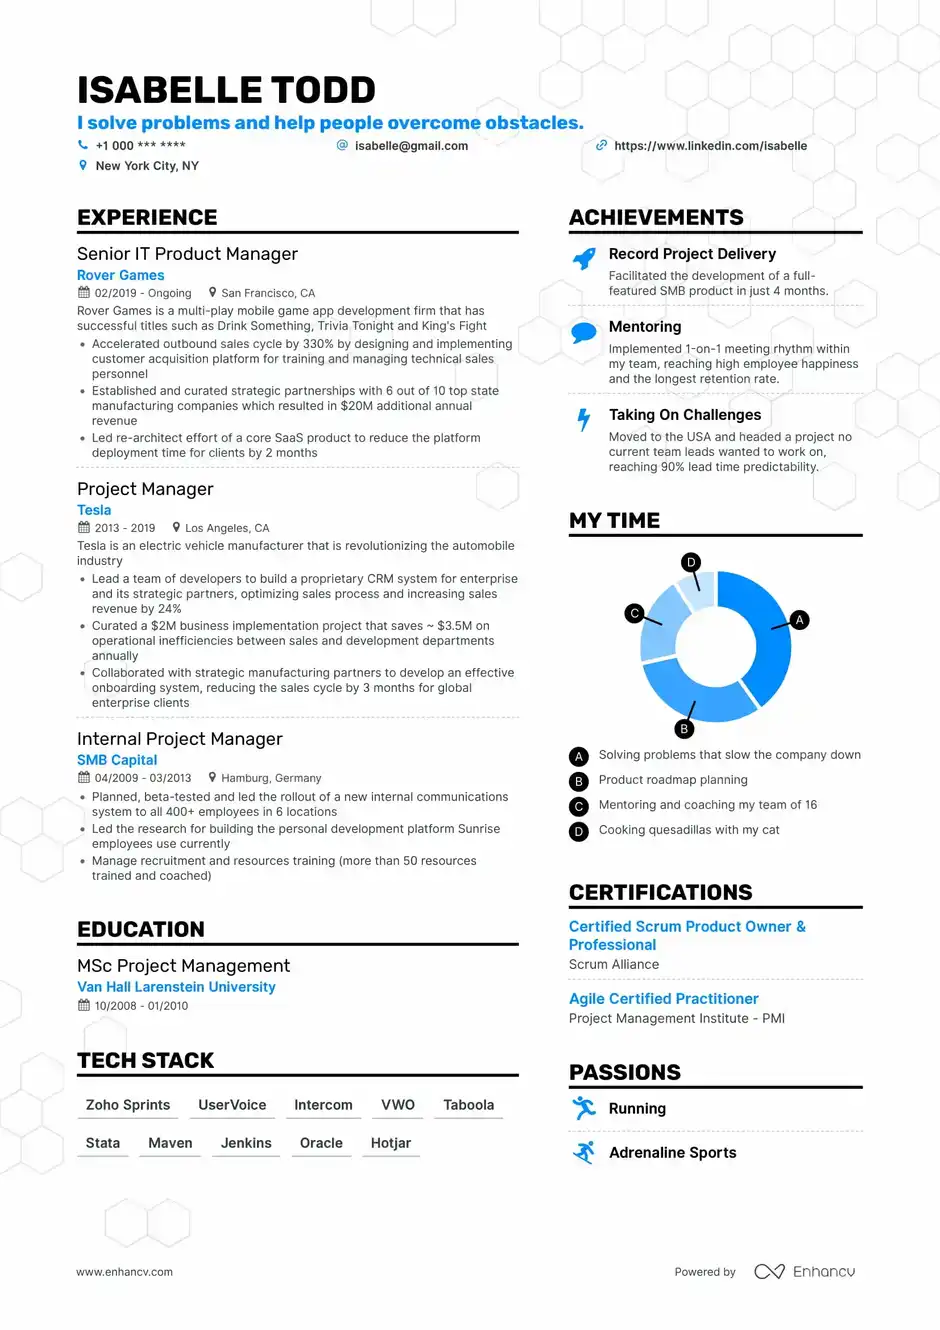 How To Improve At resume In 60 Minutes